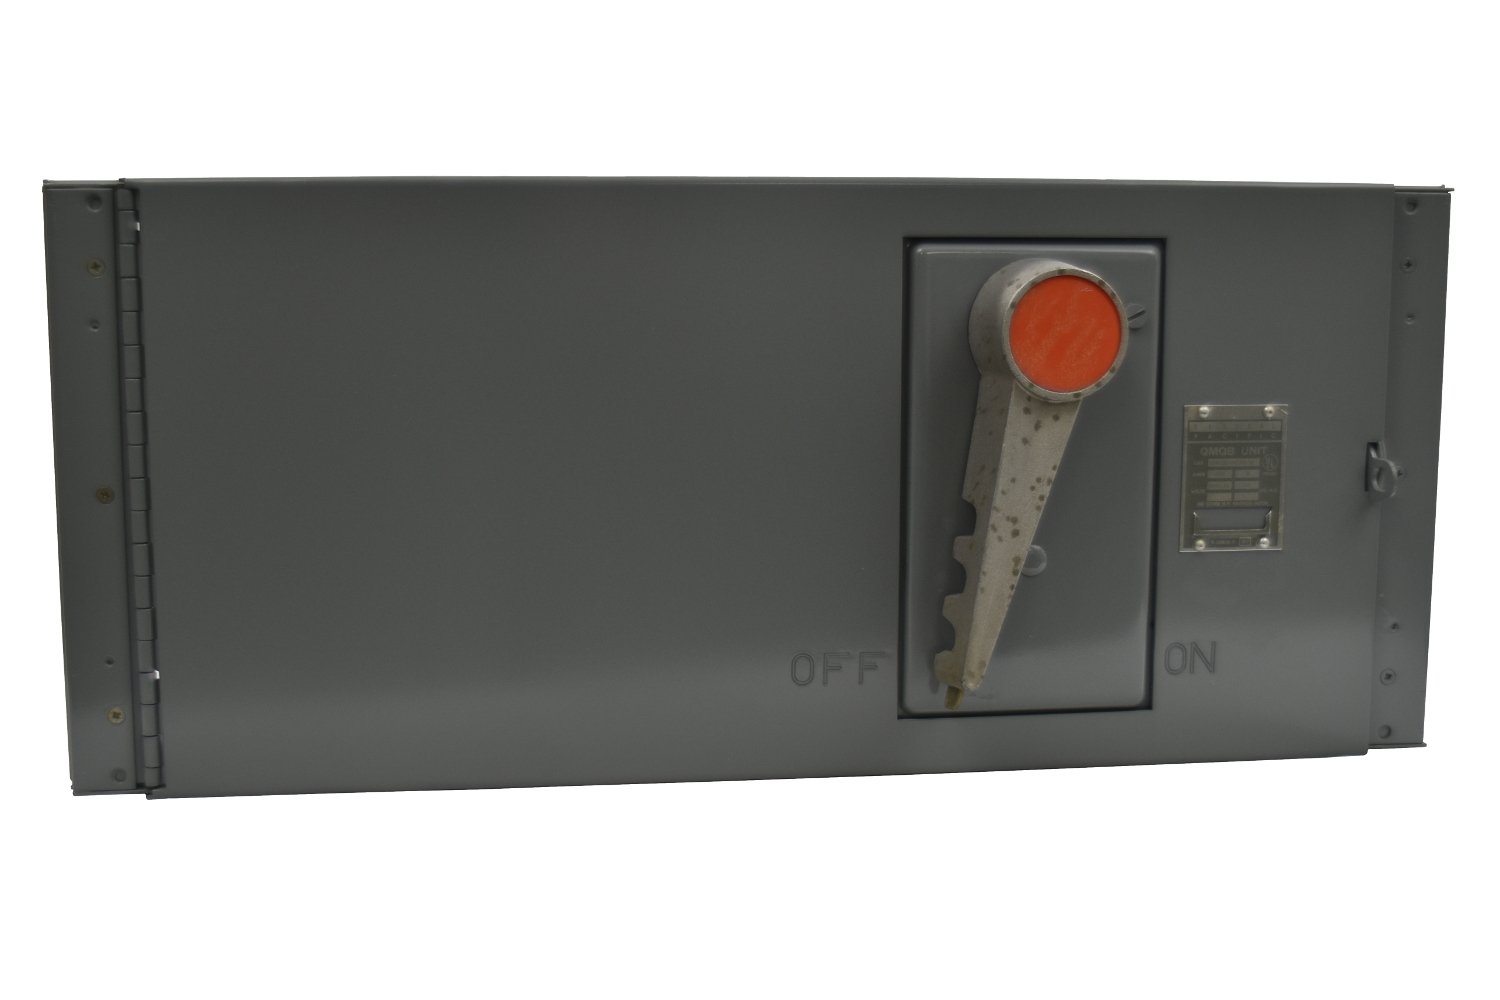 Federal Pacific QMQB2032R Panelboard, Panel Mount Switch: 200 Amp, 240 Volt, 3 Pole